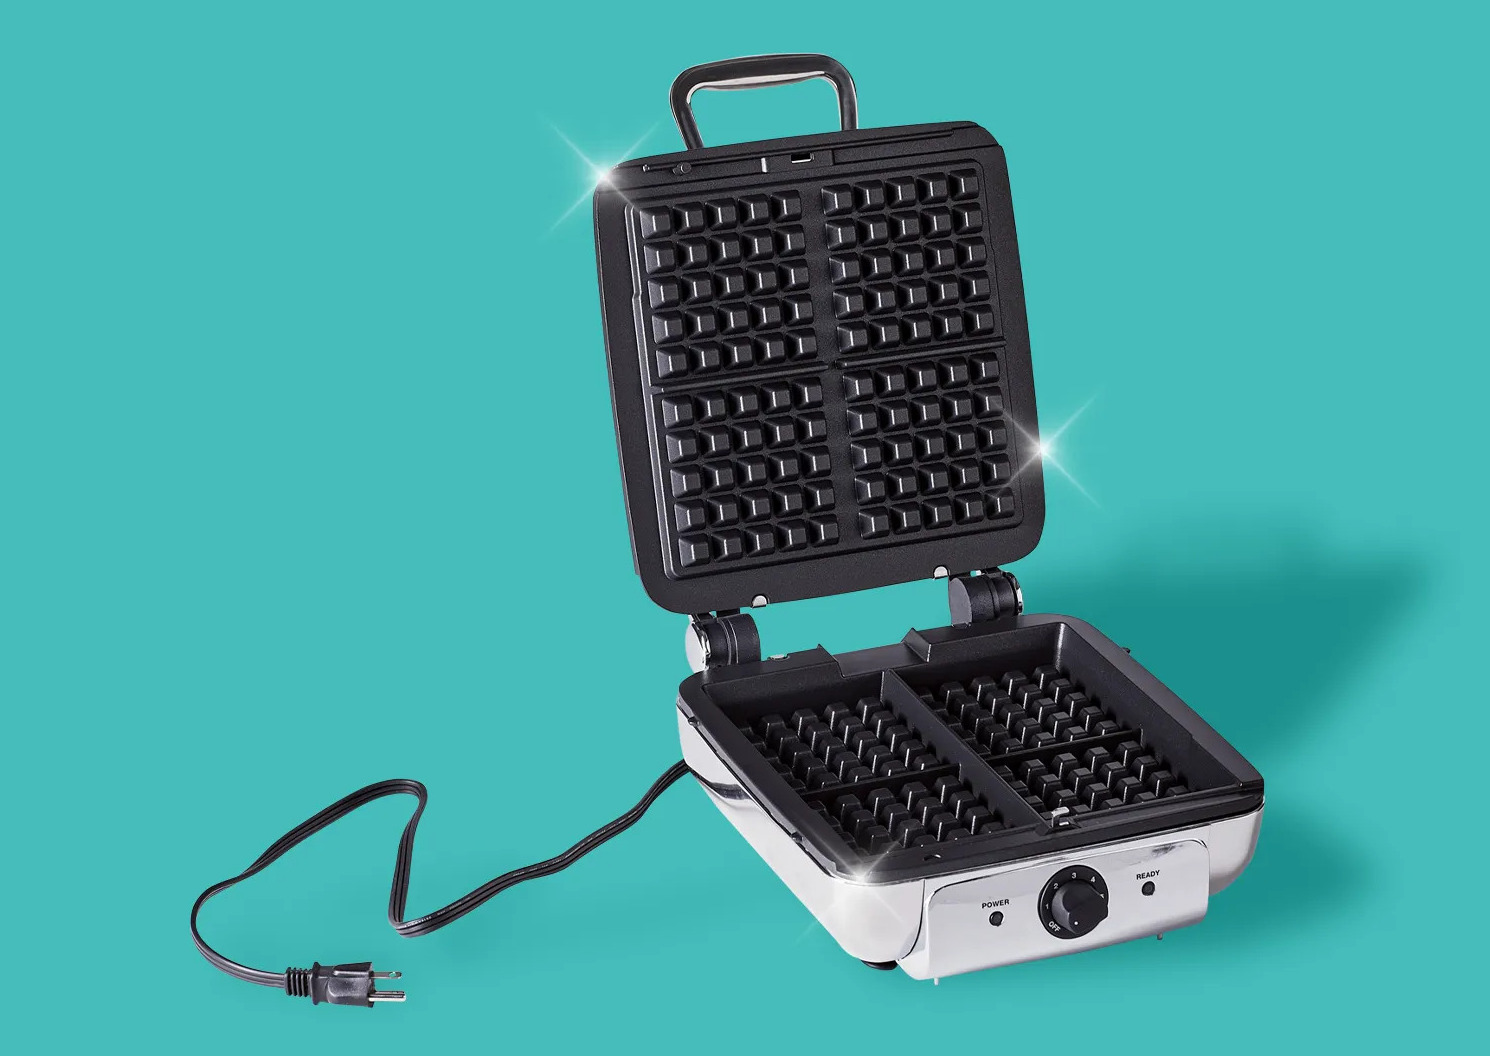 Welcome to the Waffle Evolution, Waffle Maker